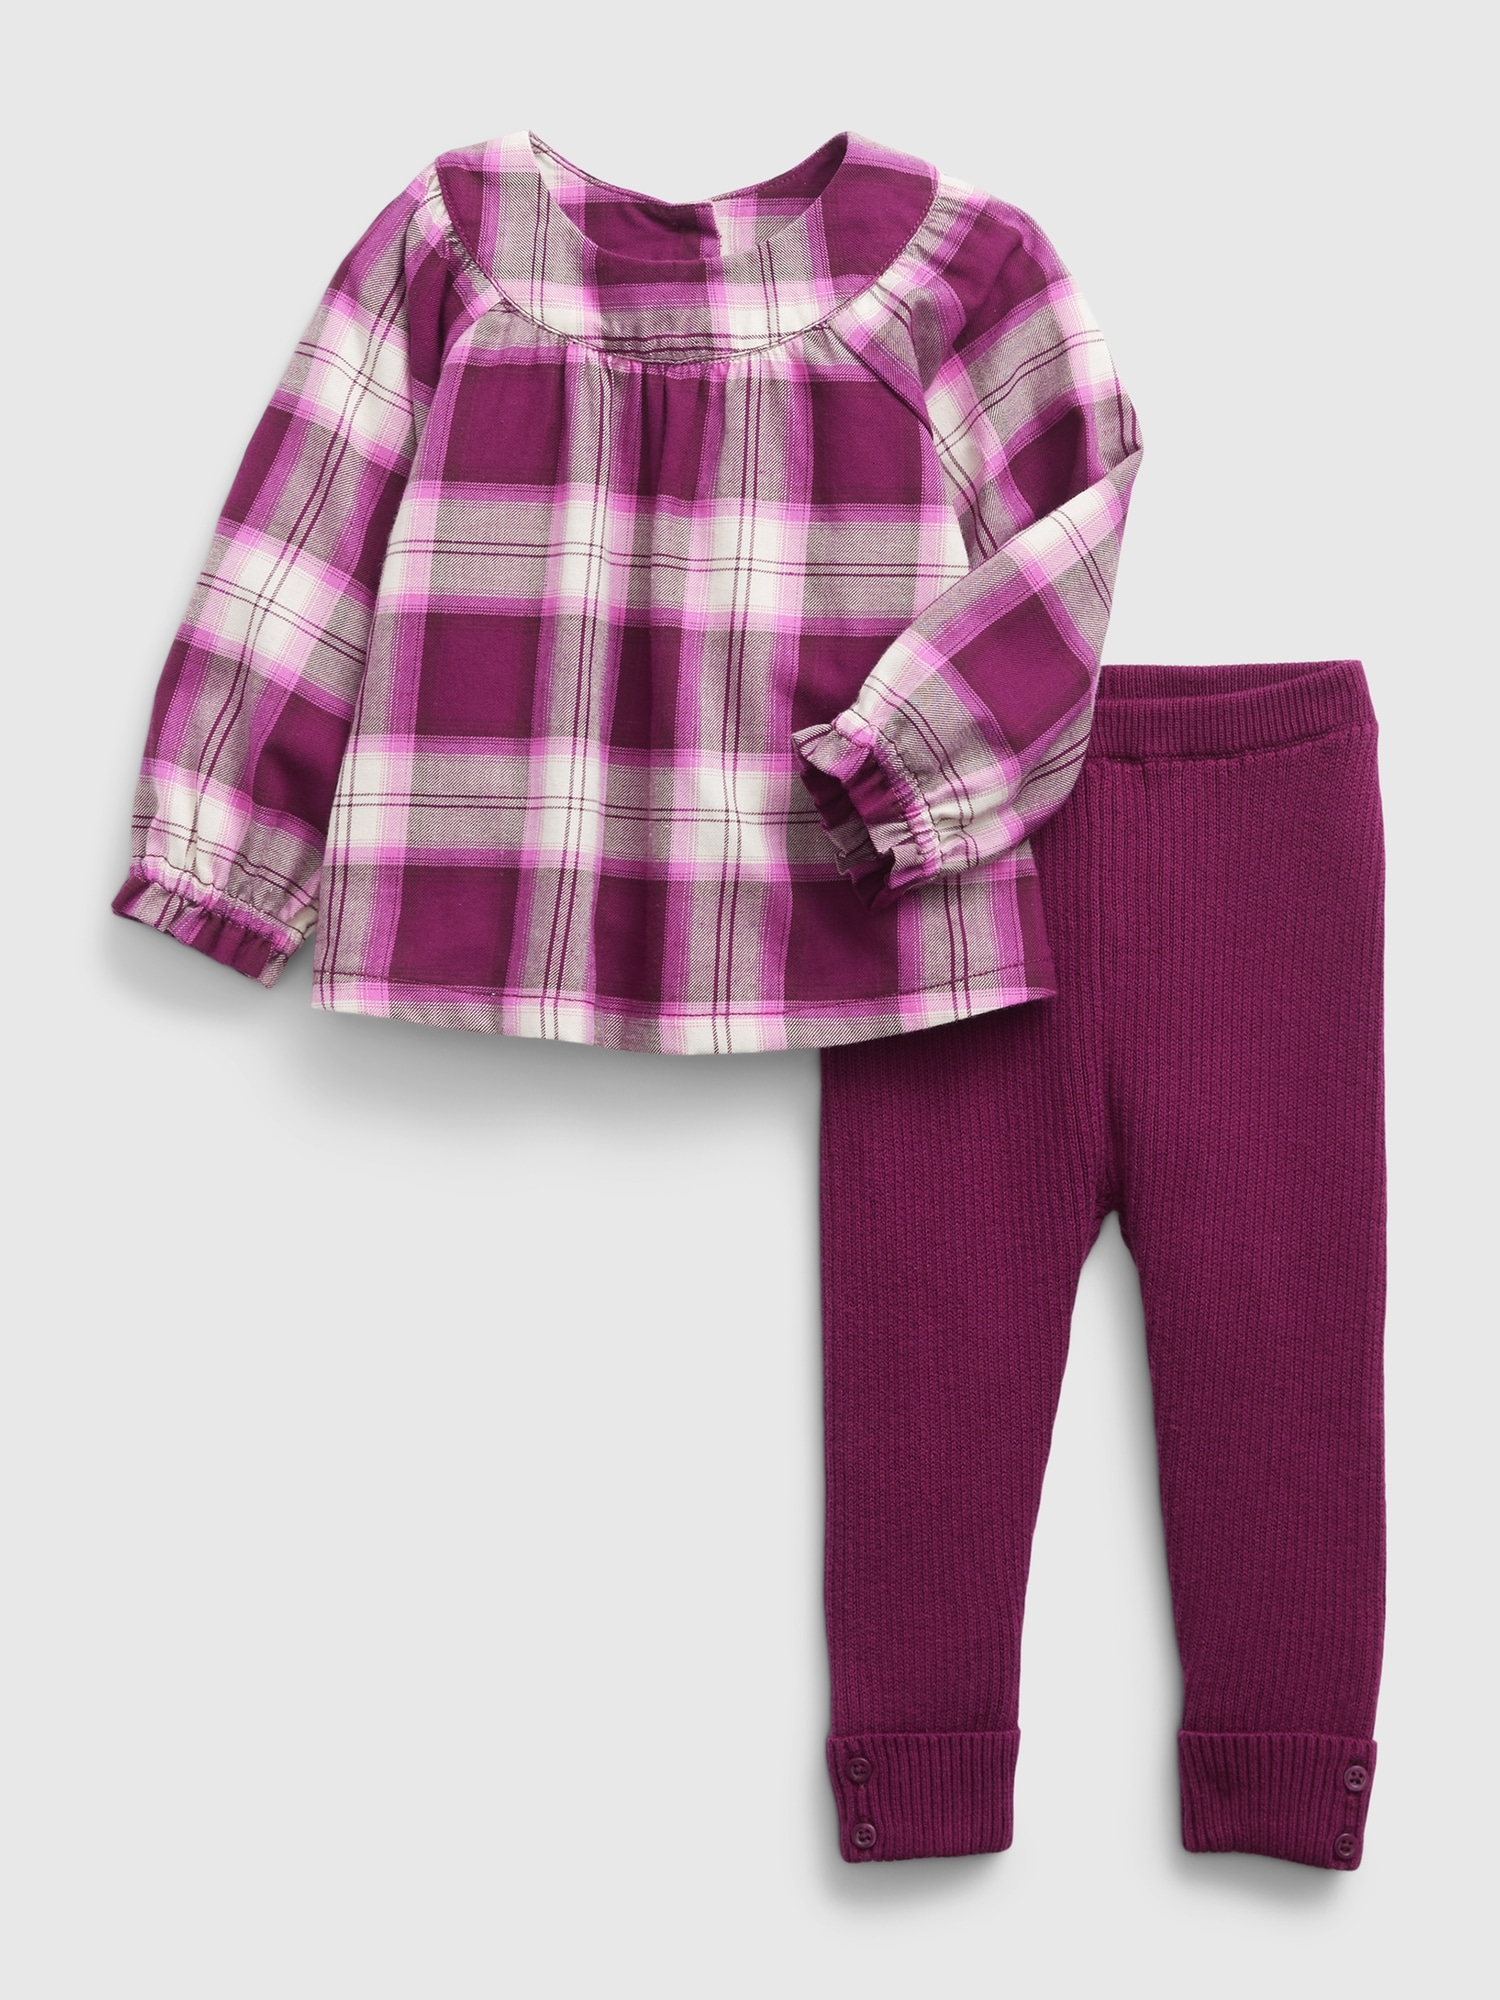 Gap Baby Flannel Two-Piece Outfit Set purple. 1